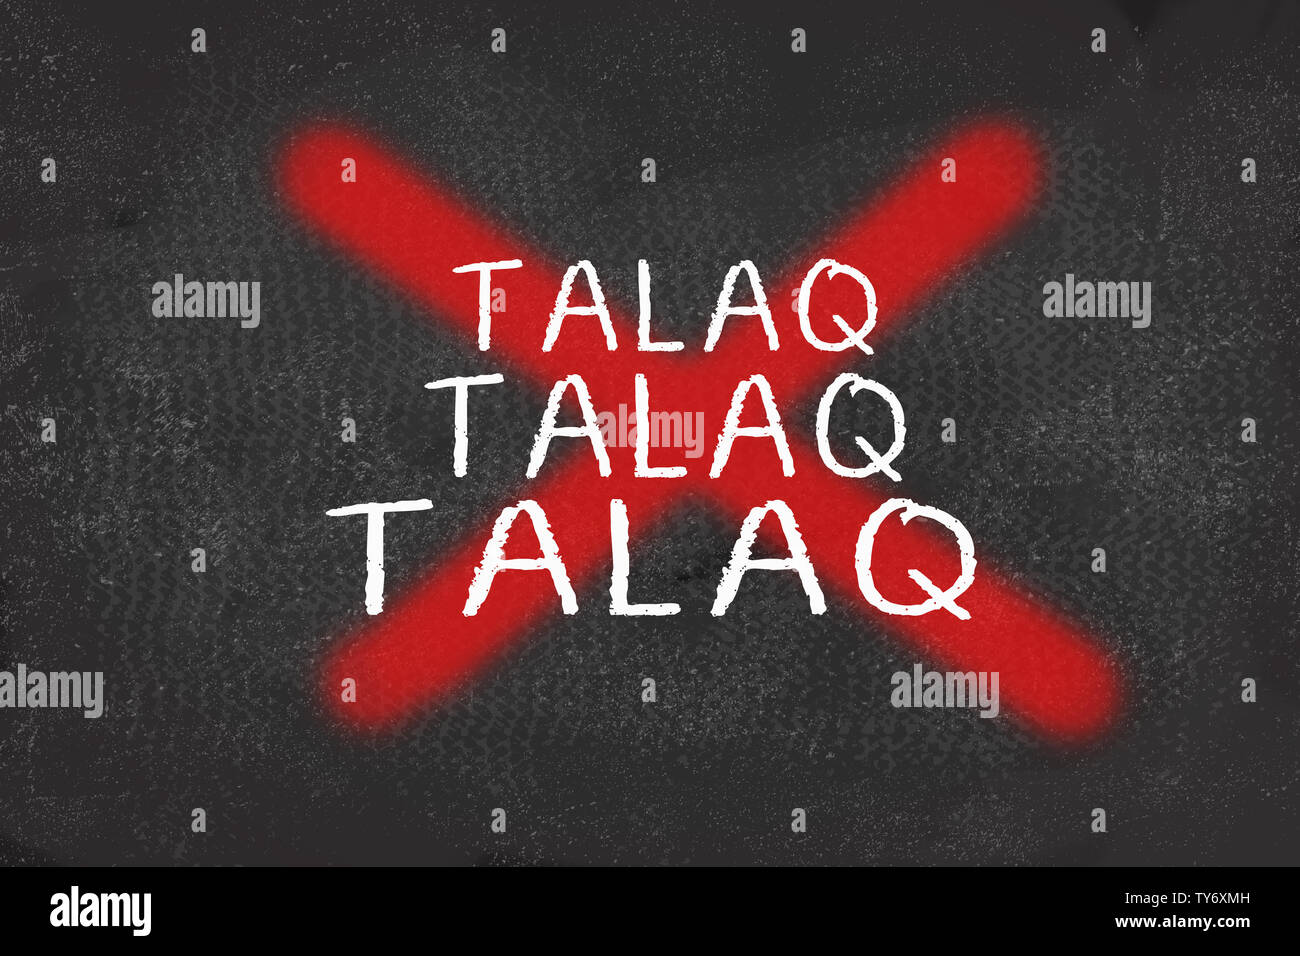 Concept of showing ban on Triple Talaq with red cross mark over triple talaq text black board Stock Photo